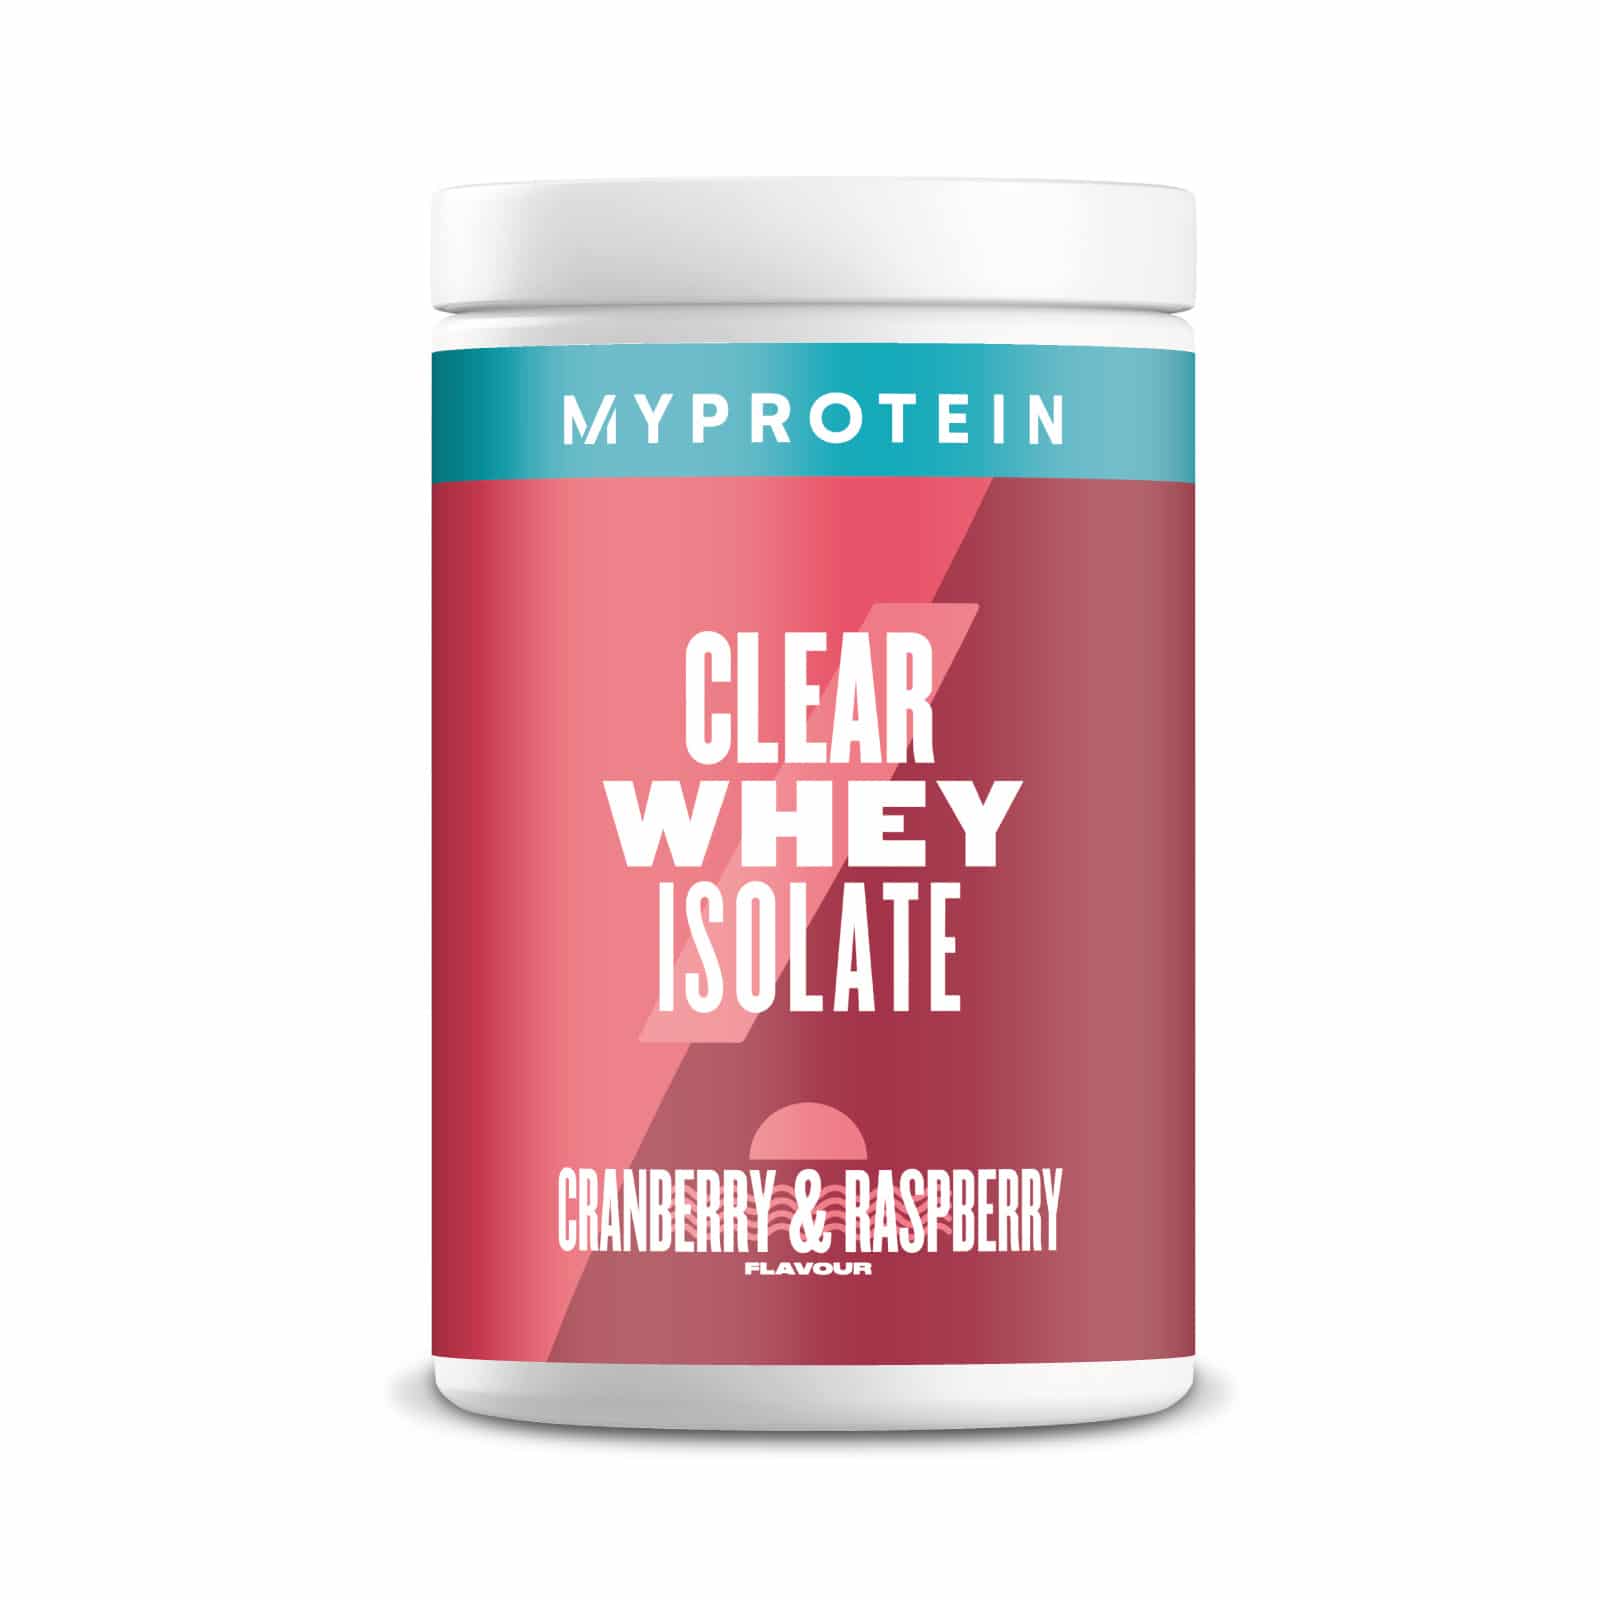 Clear whey isolate 